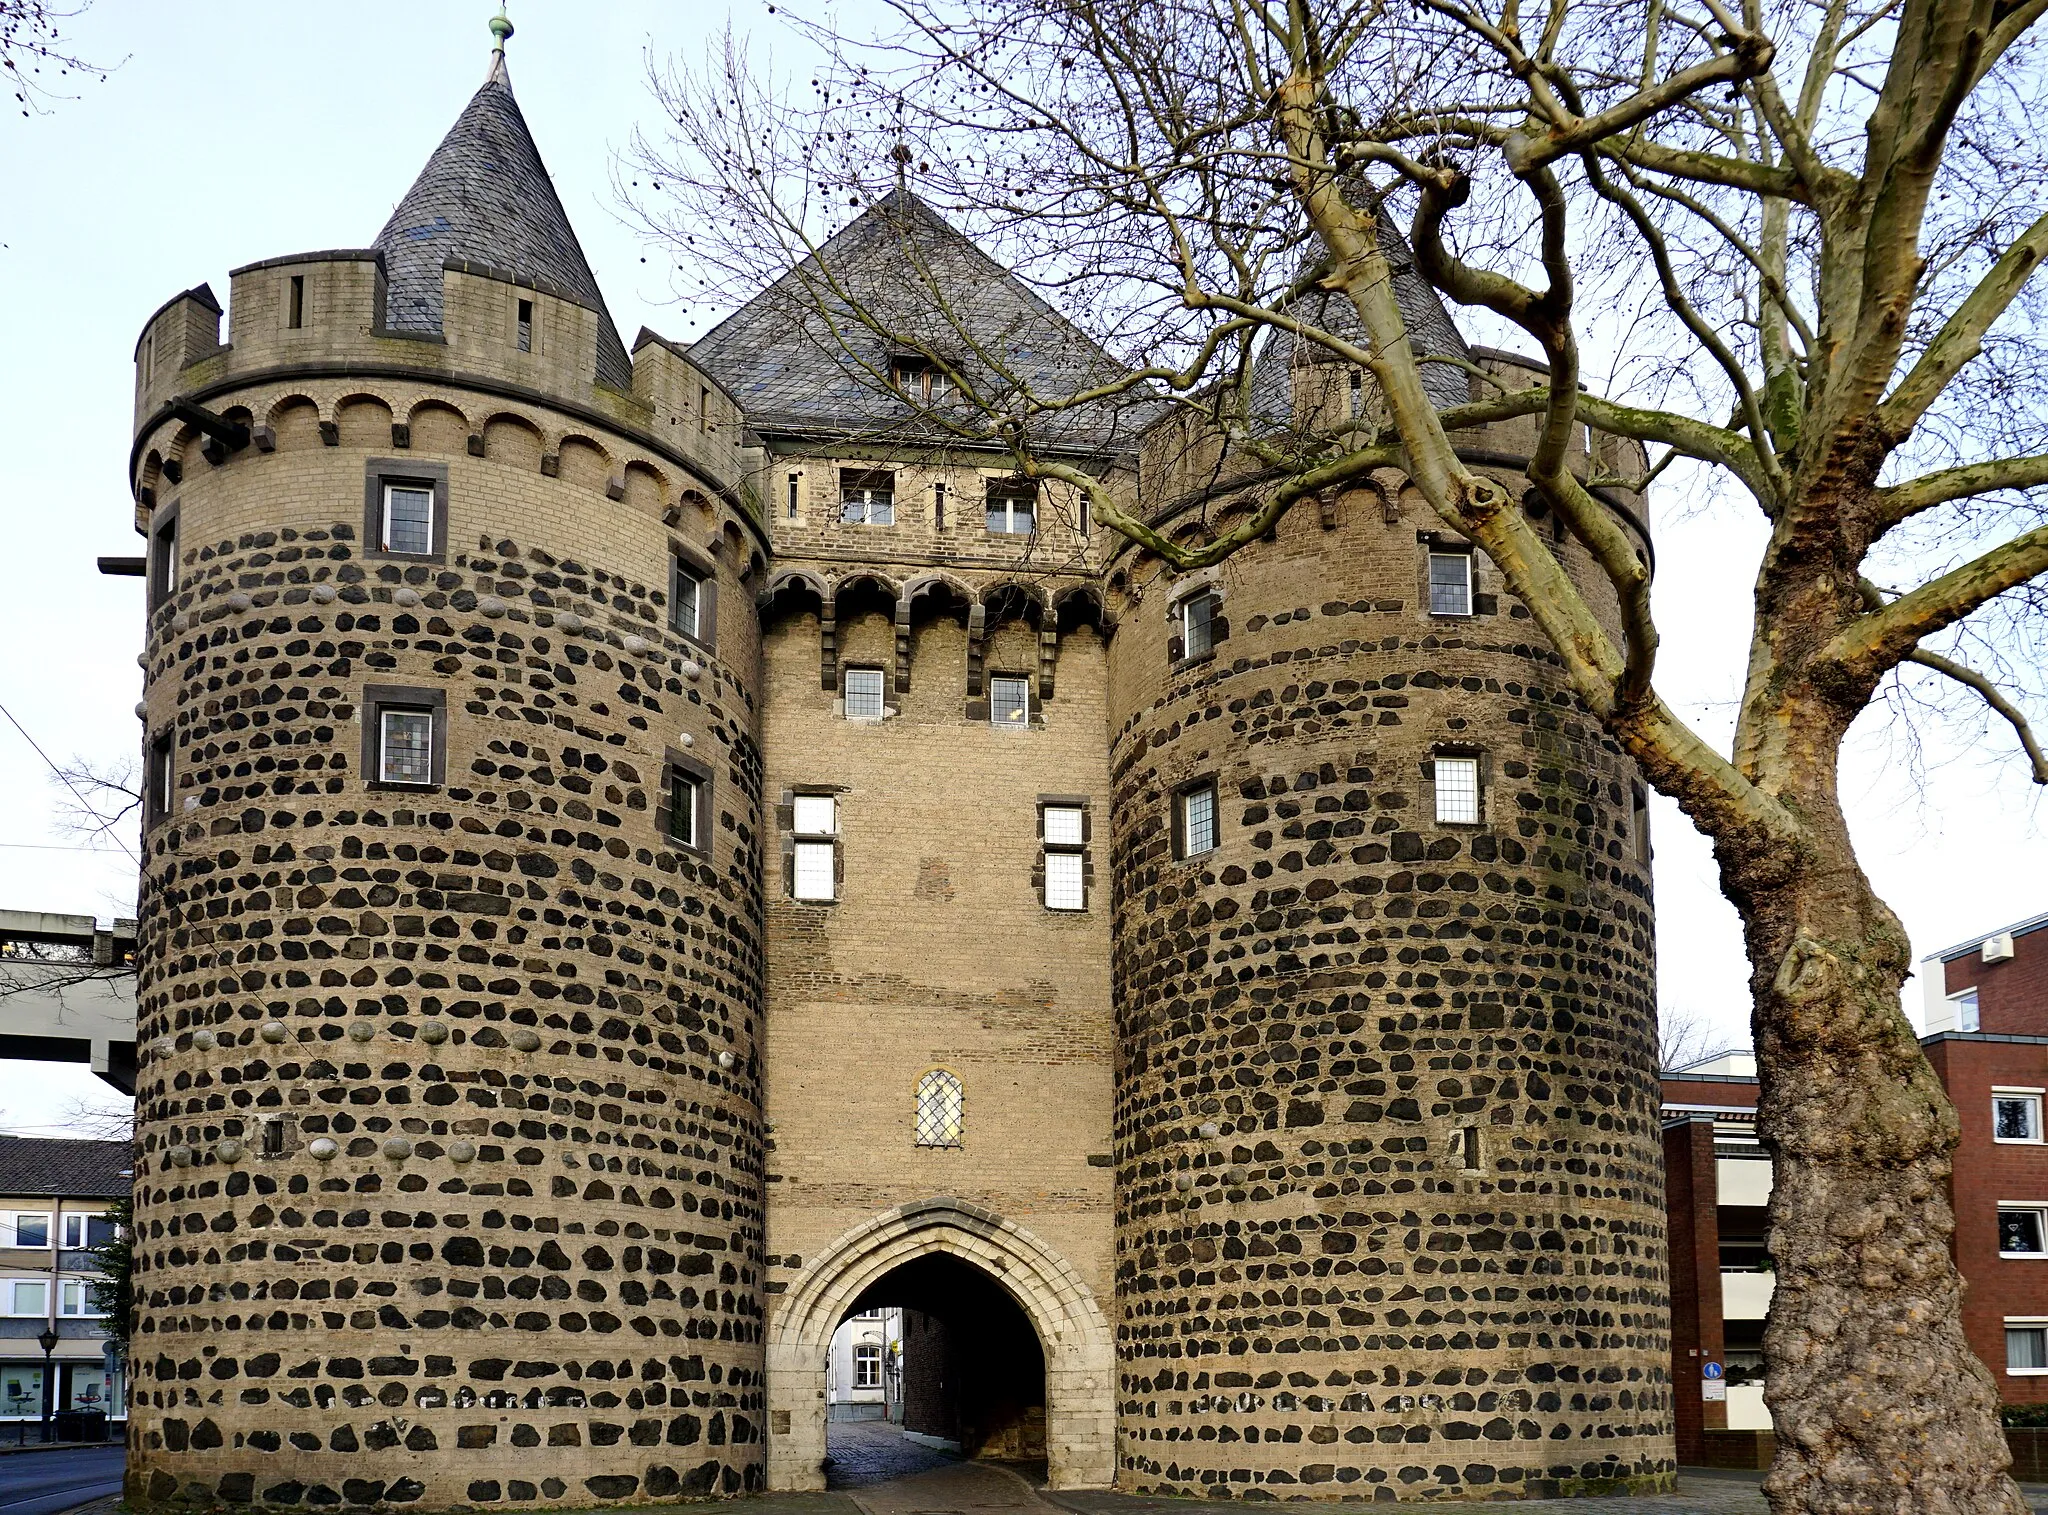 Photo showing: The picture shows the Obertor ("Upper Gate") in Neuss, Germany.